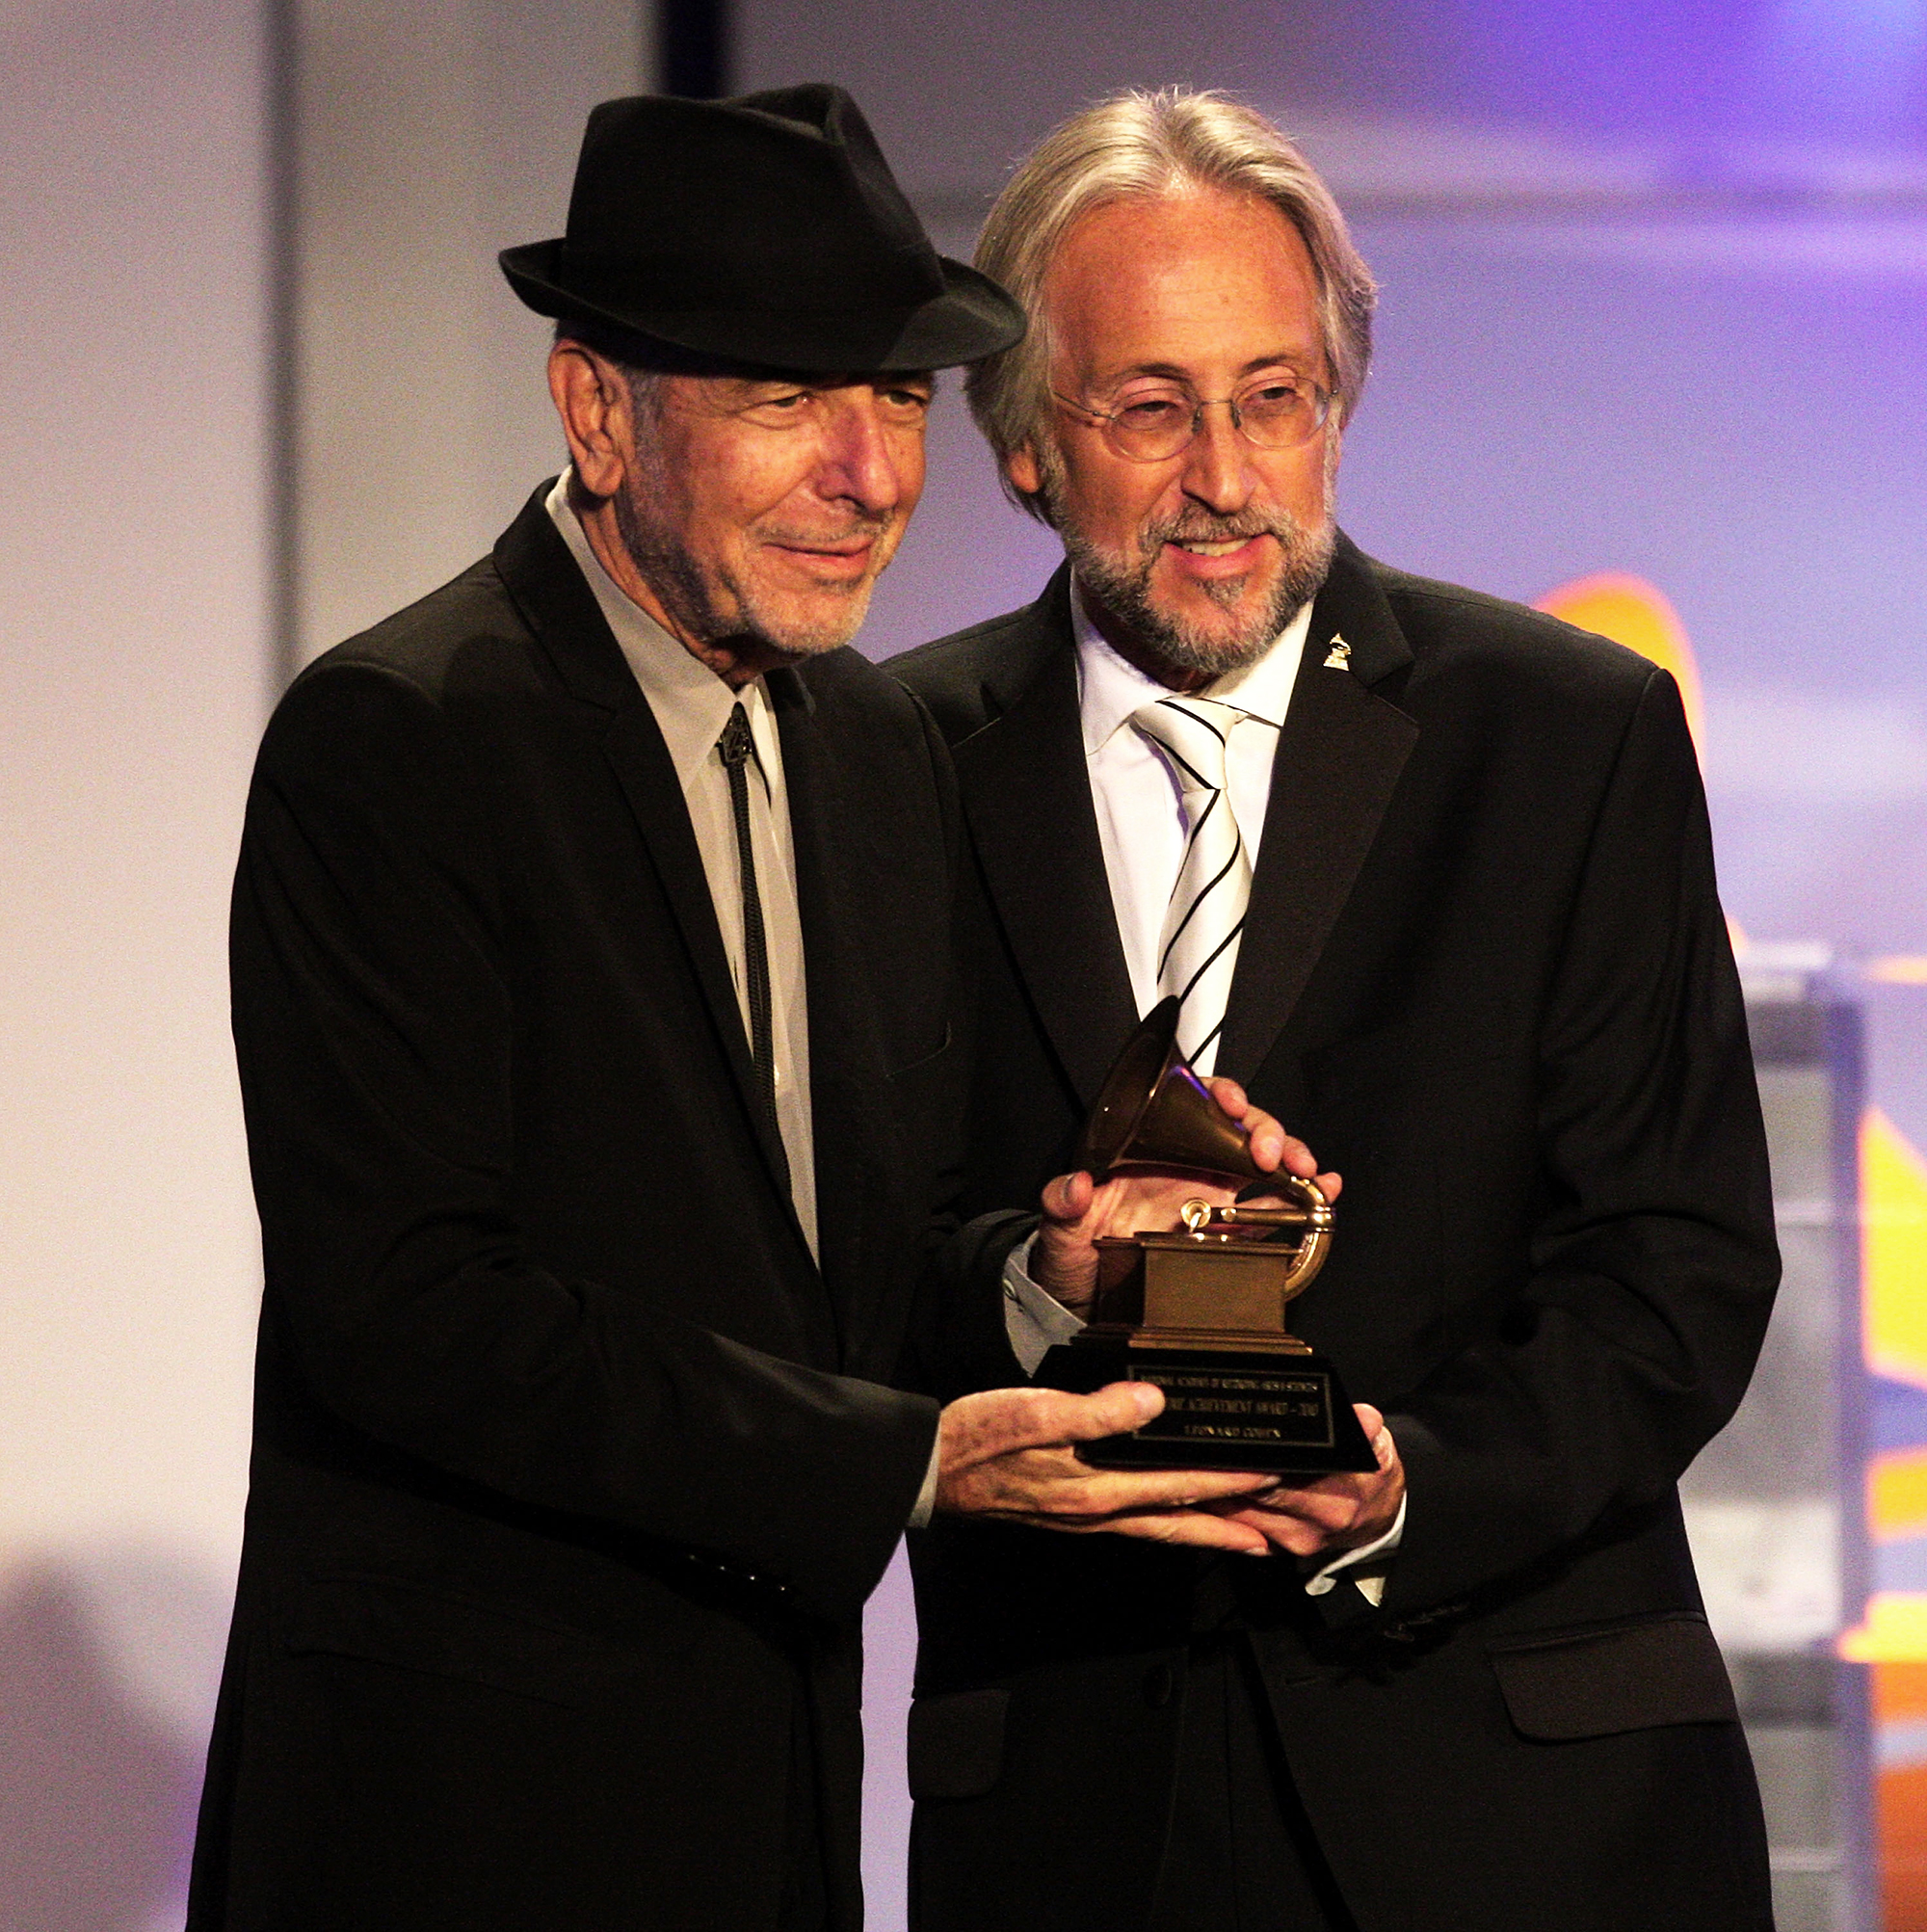 Leonard Cohen and Neil Portnow, President/CEO of the Recording Academy, attend the 52nd annual GRAMMY Awards-Special Merit Awards on Jan. 30, 2010 in Los Angeles.